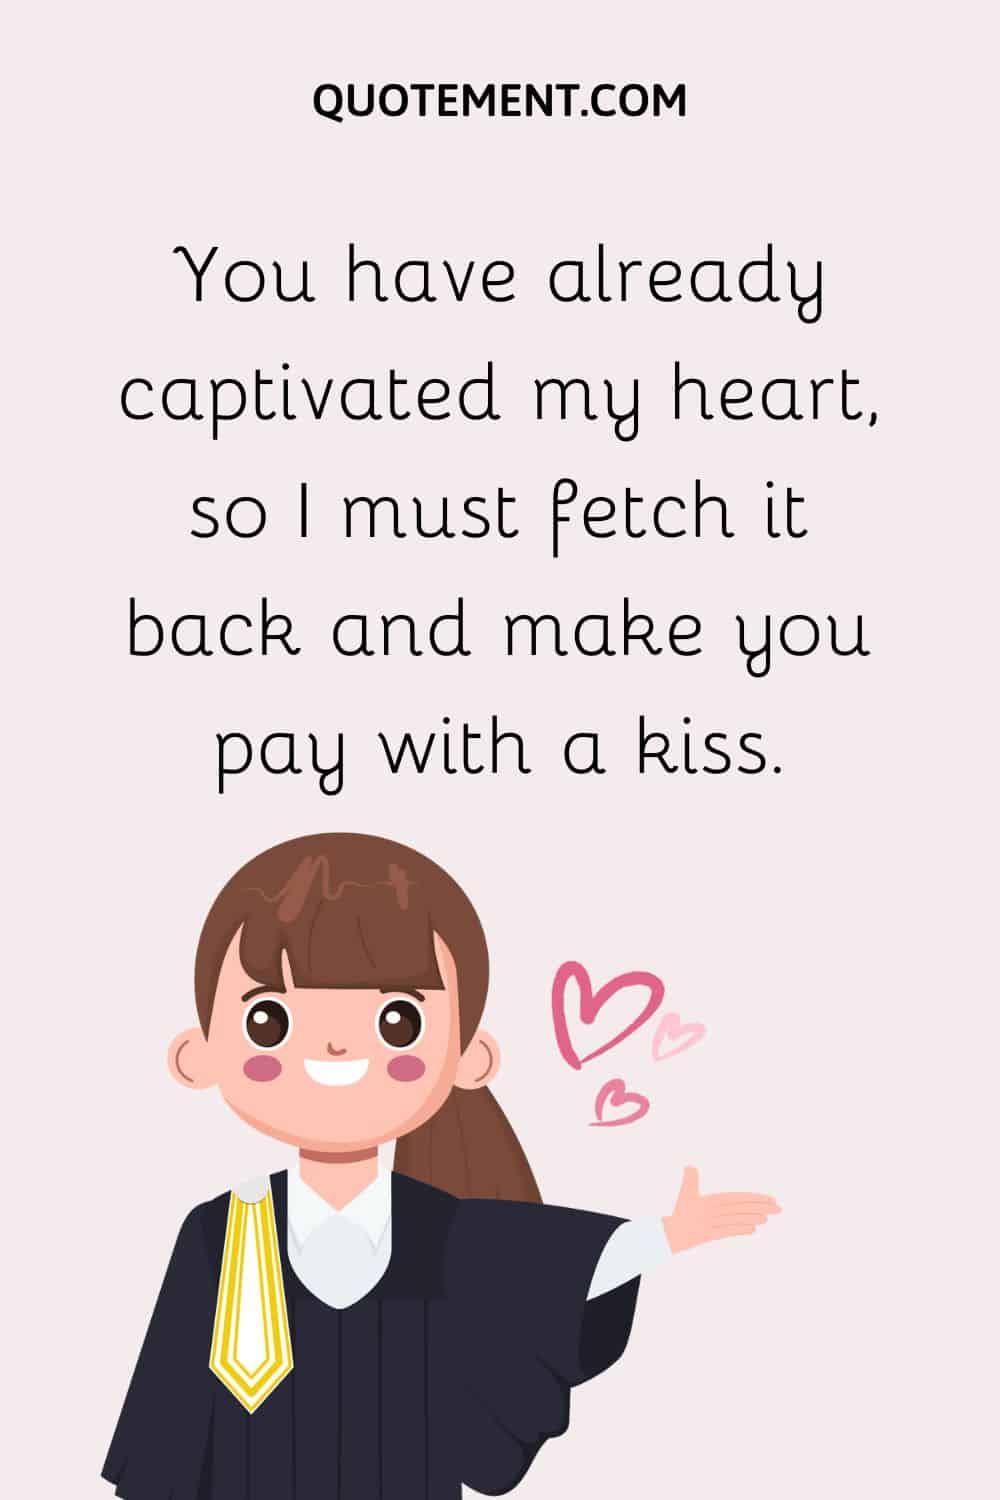 You have already captivated my heart, so I must fetch it back and make you pay with a kiss